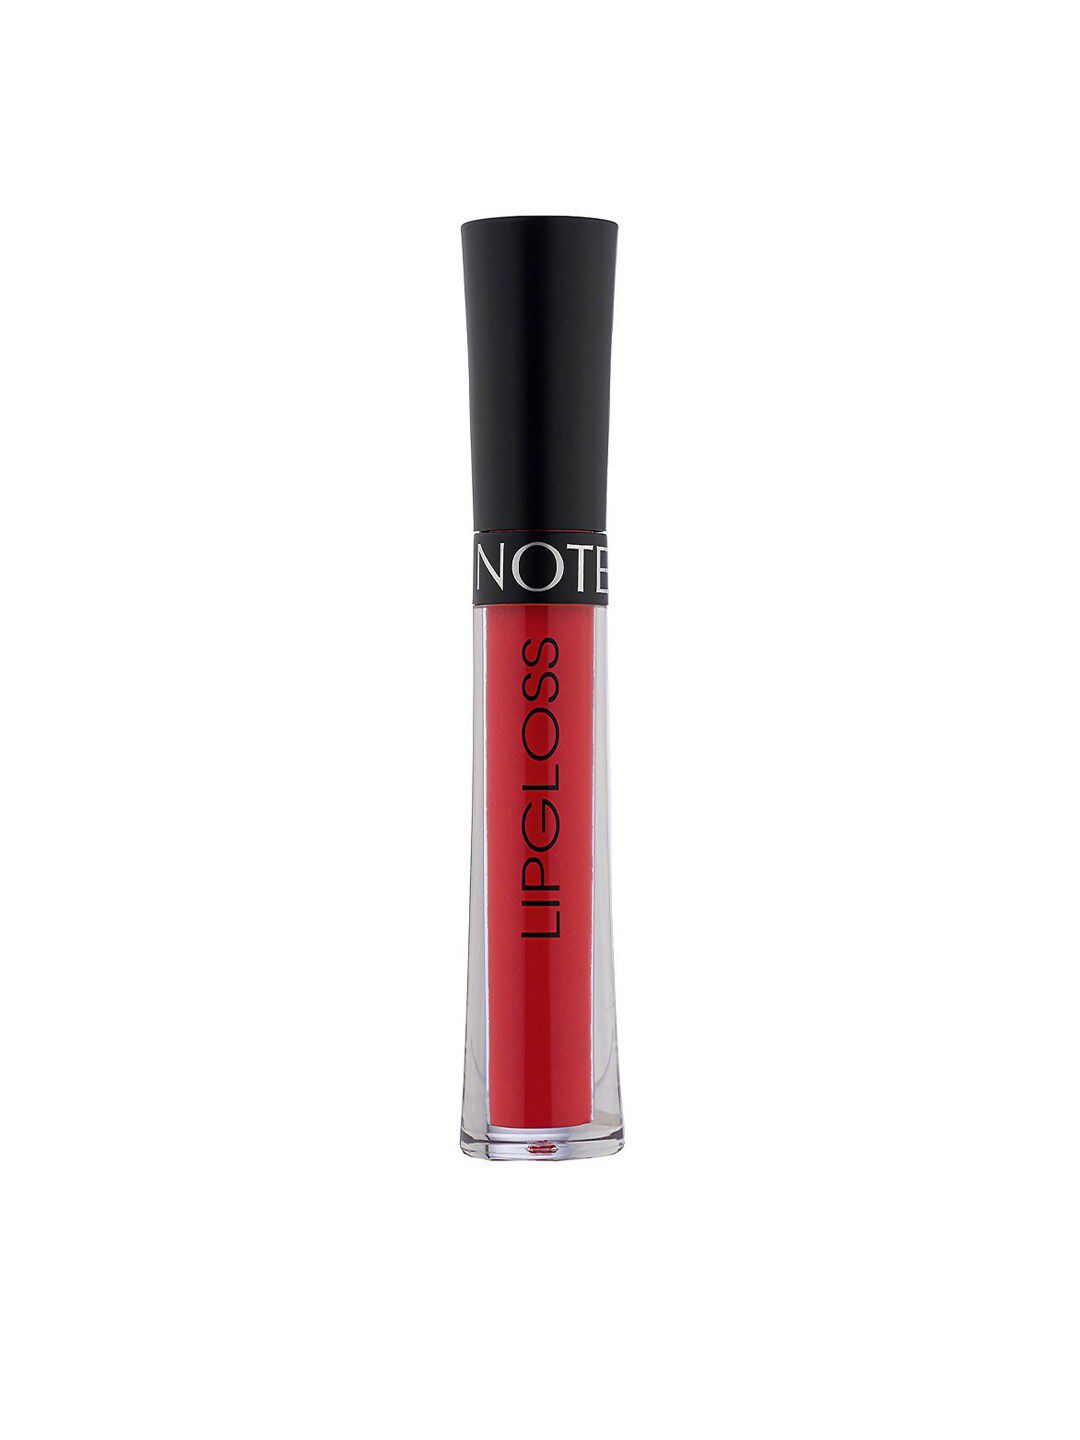 Note Hydra Color Lipgloss 24 Price in India